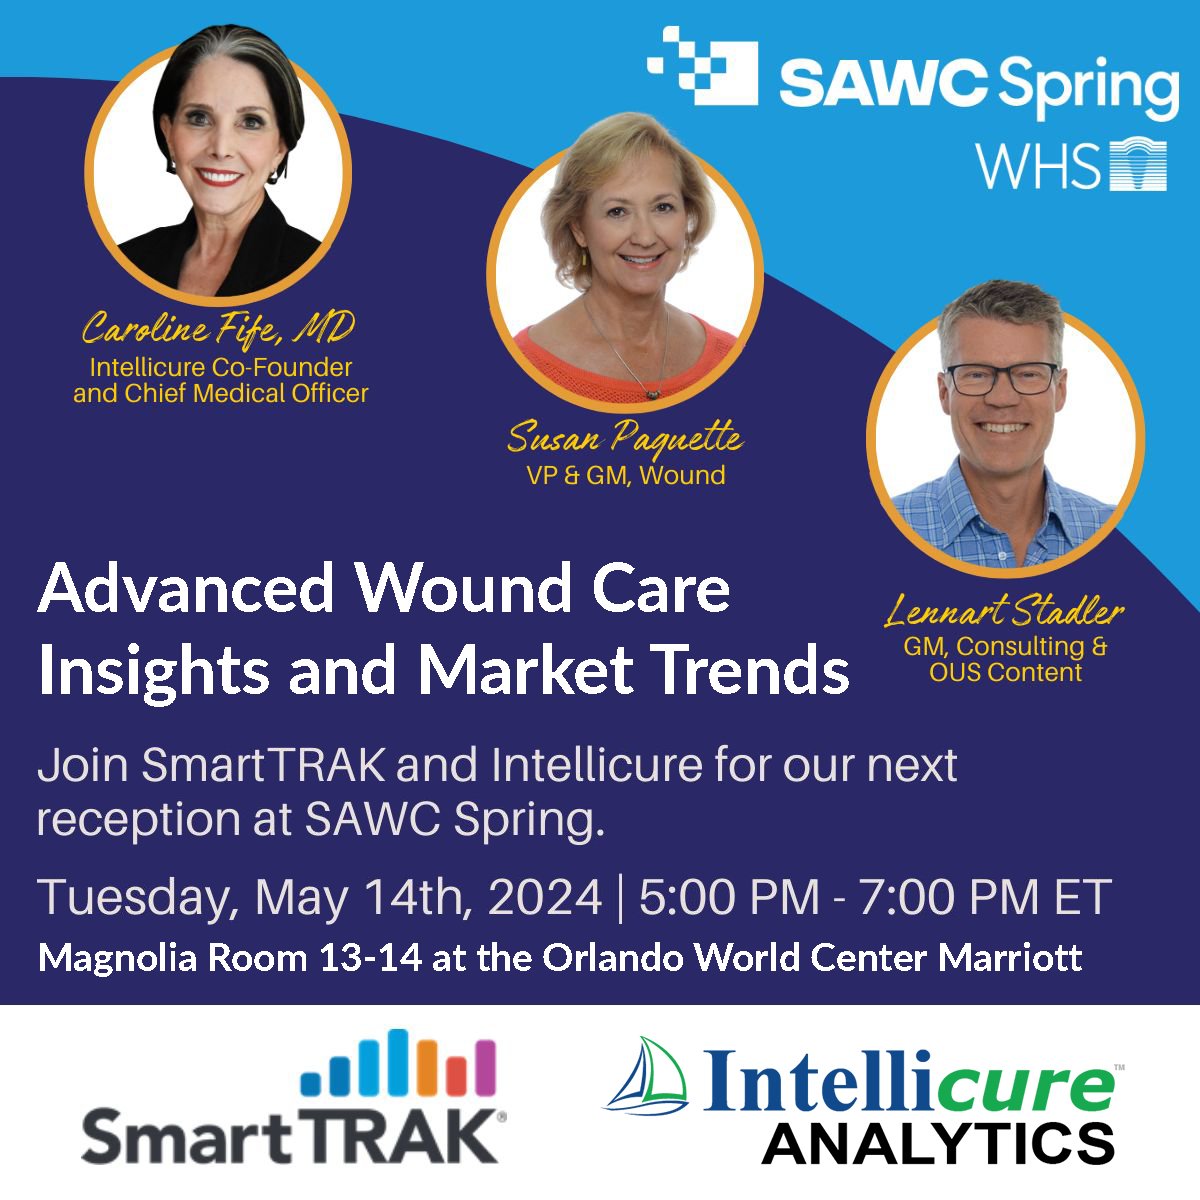 If you are attending #SAWCSpring2024, you don't want to miss this!

RSVP here: landing.smarttrak.com/SAWC-2024

#DifferenceMakers #WoundAnalytics #SAWC #WoundHealing #Wounds #WoundApp #BestWoundCare #WoundERP #WoundEMR